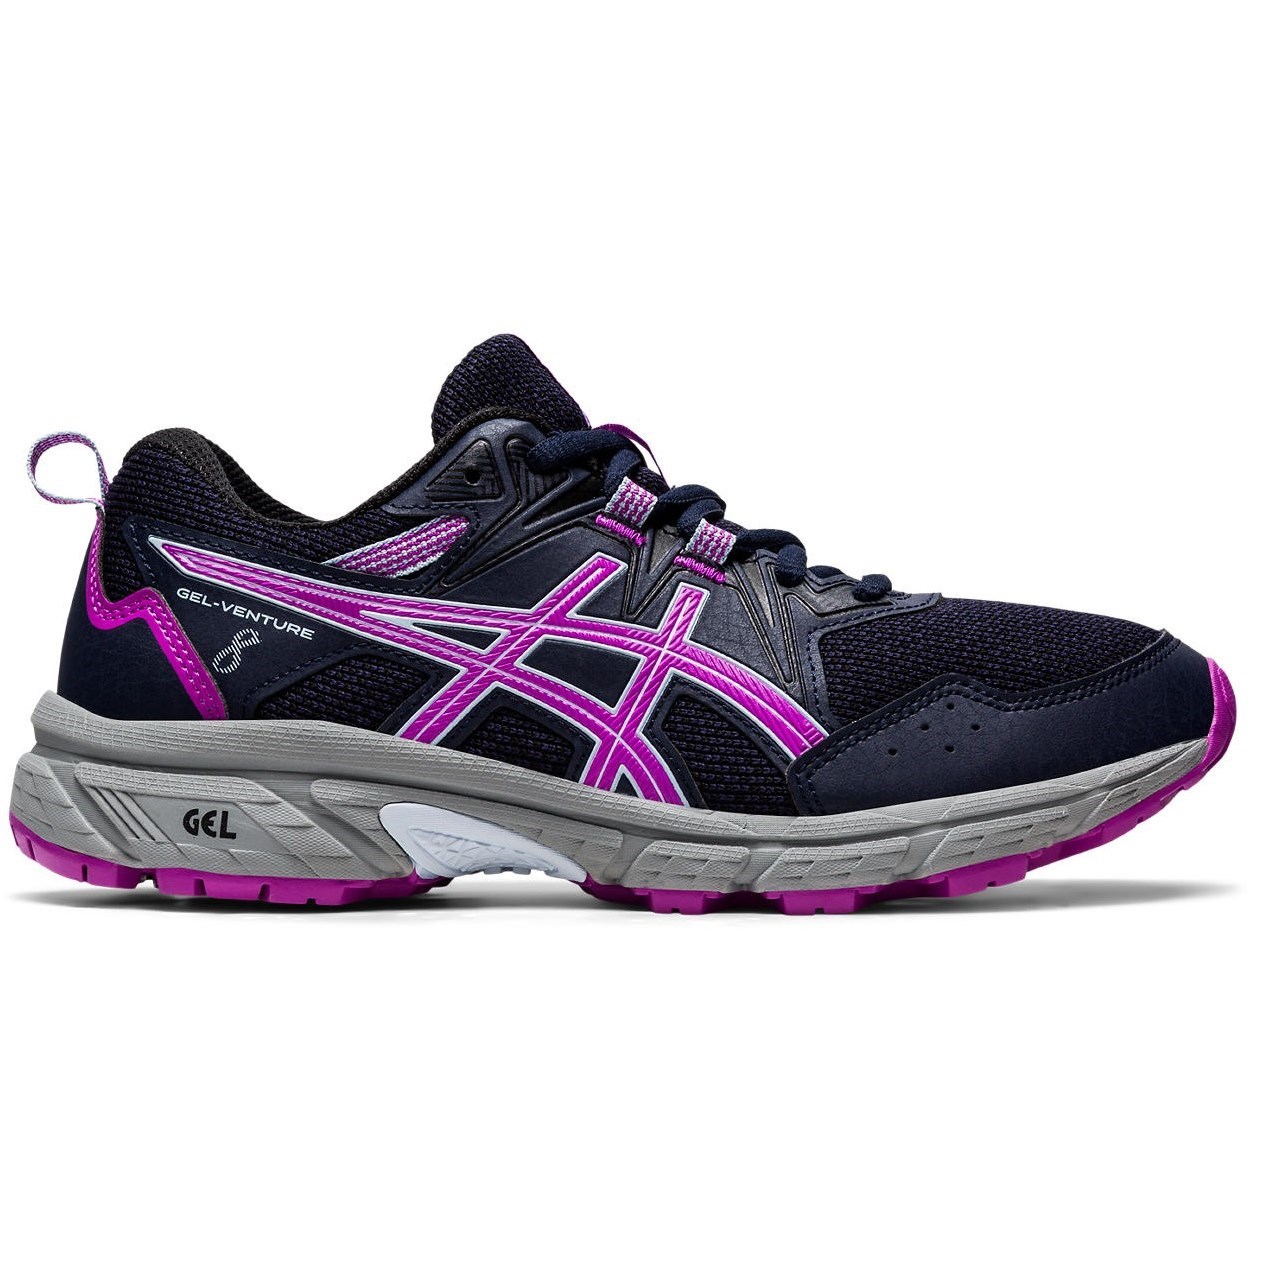 Asics Gel Venture 8 GS - Kids Trail Running Shoes - Midnight/Orchid ...